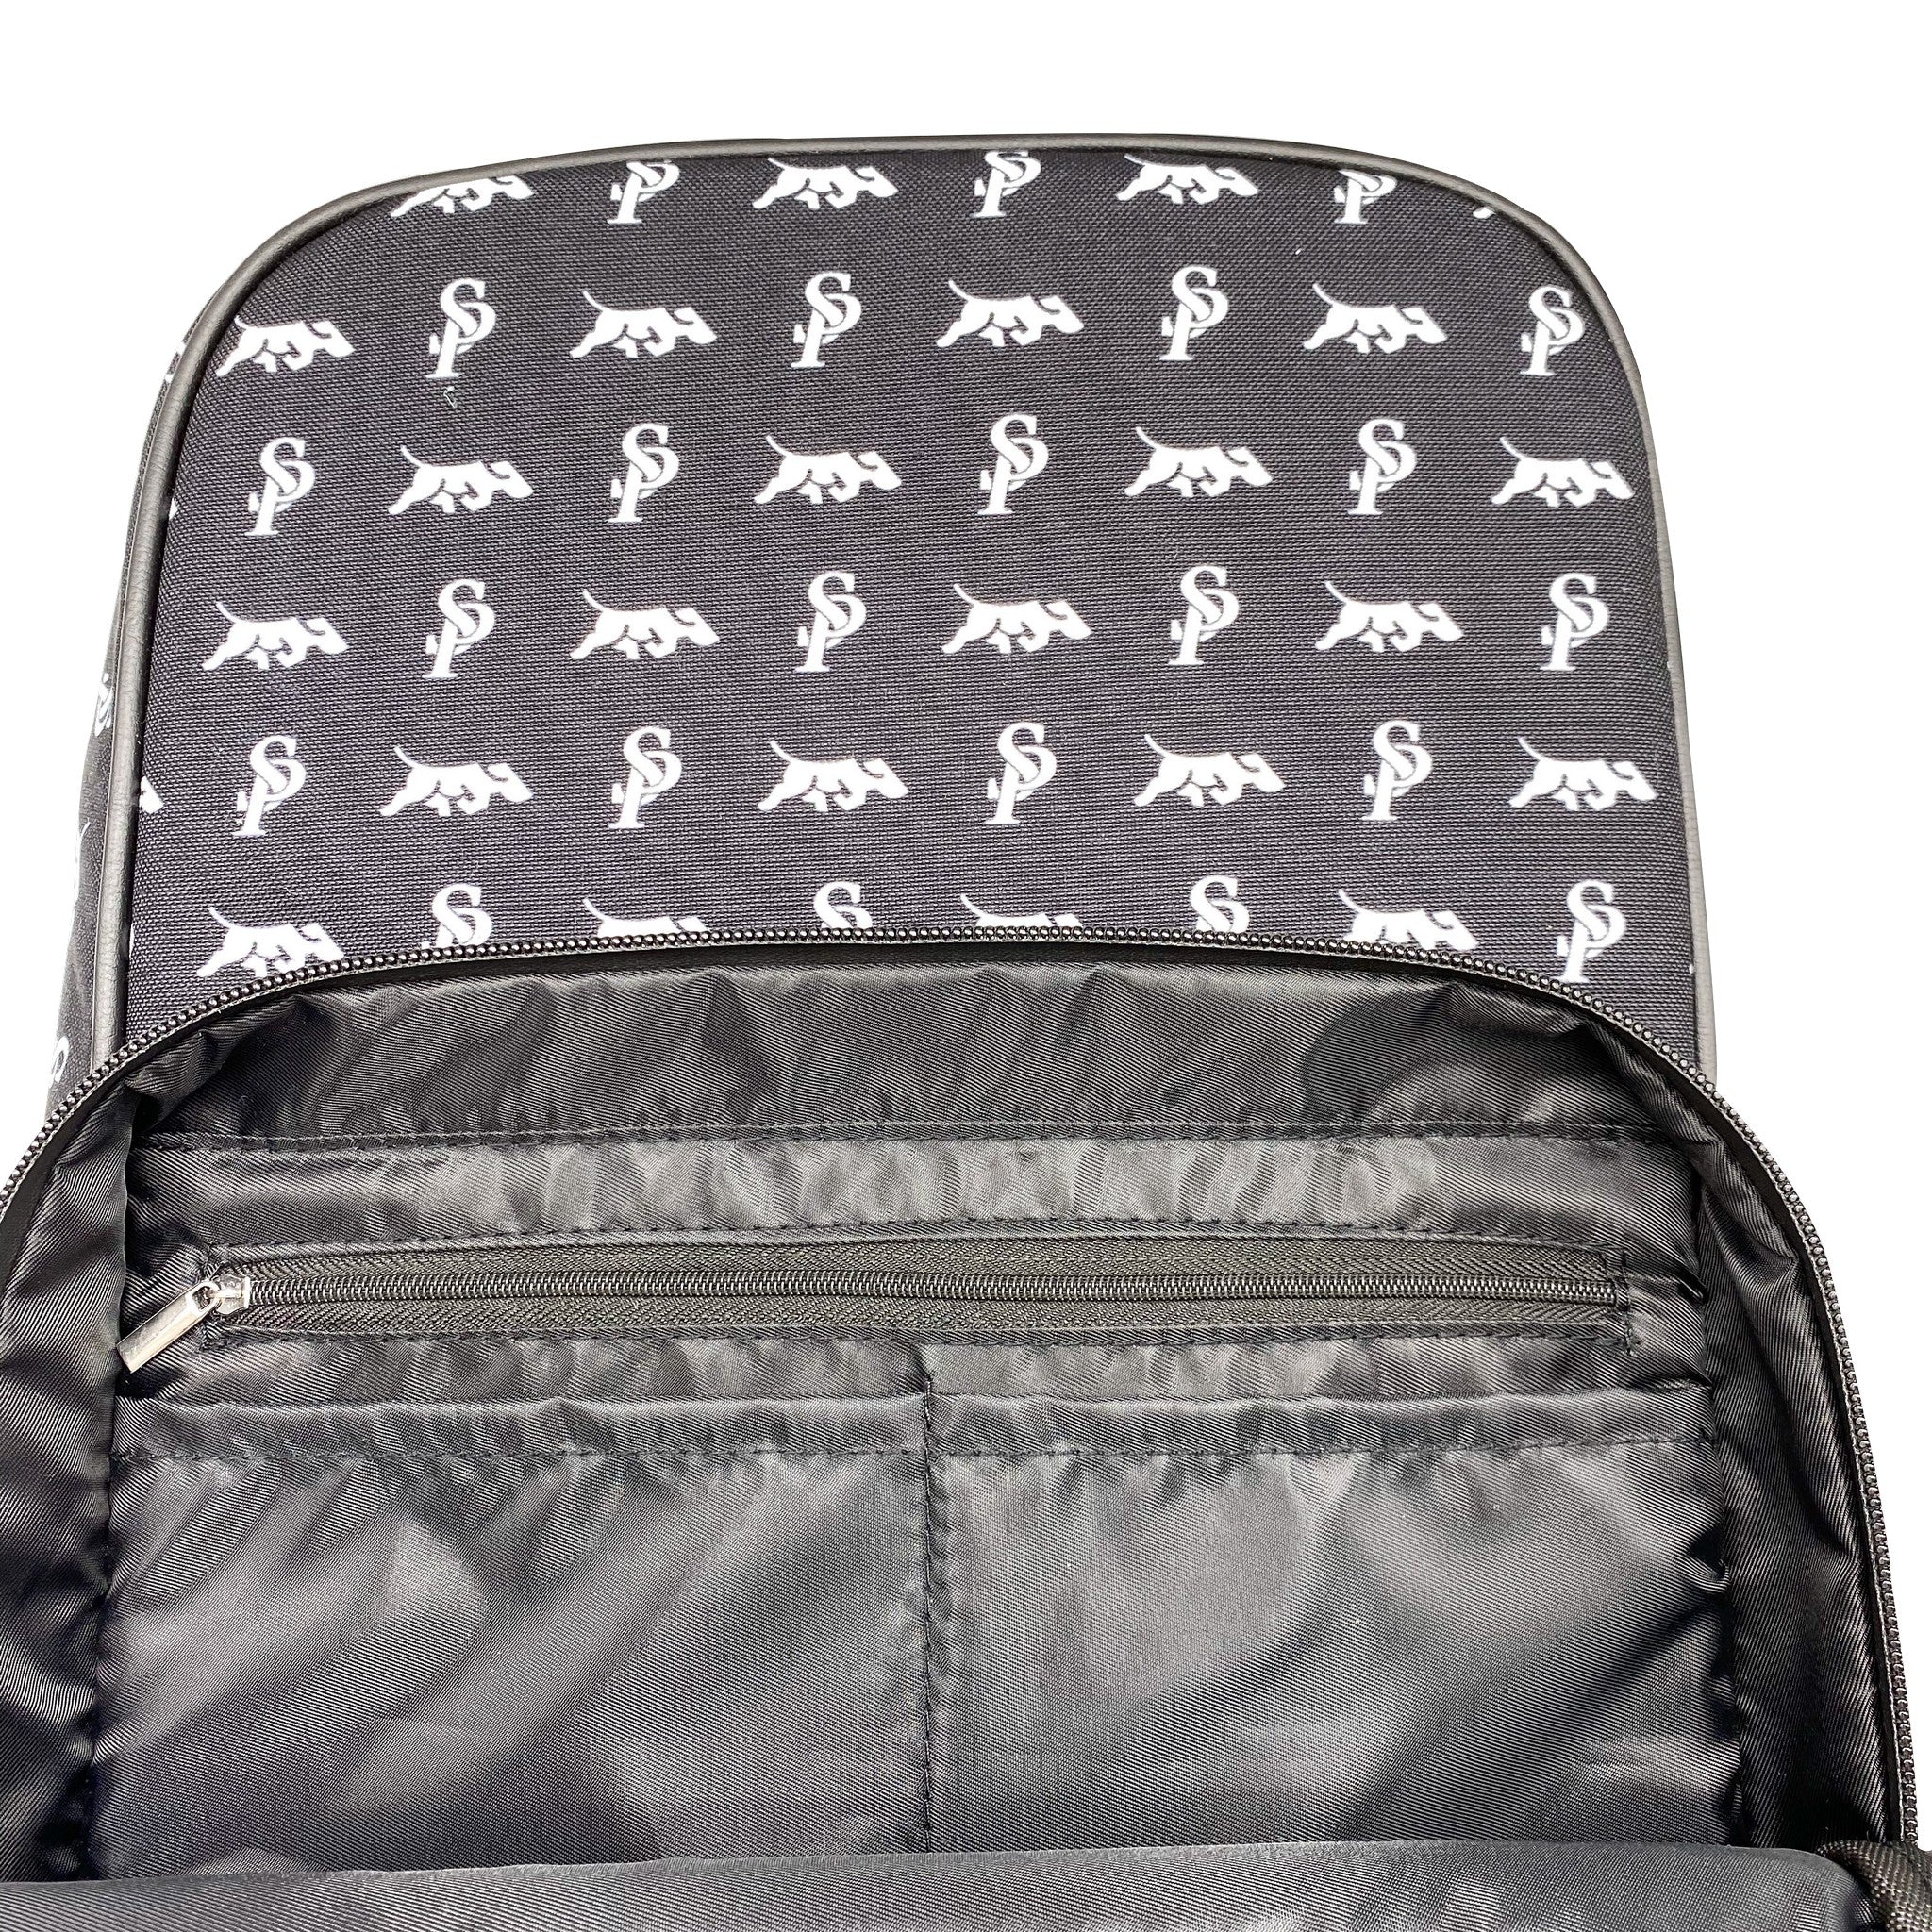 The SP BackPack in Black & White